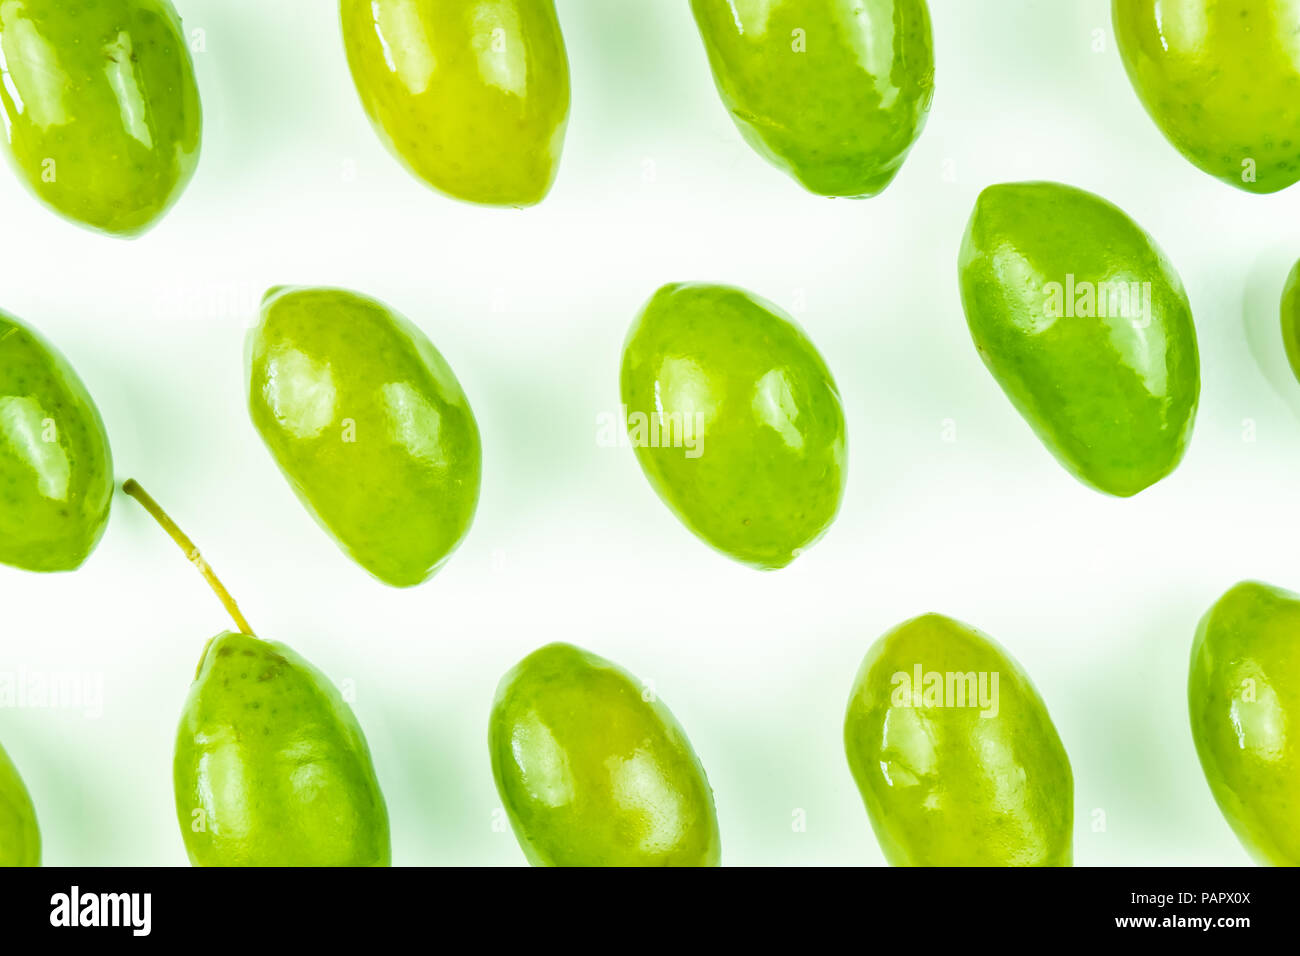 Bright top view pattern of fresh green olives on white background. Shot from above of multiple olives Stock Photo